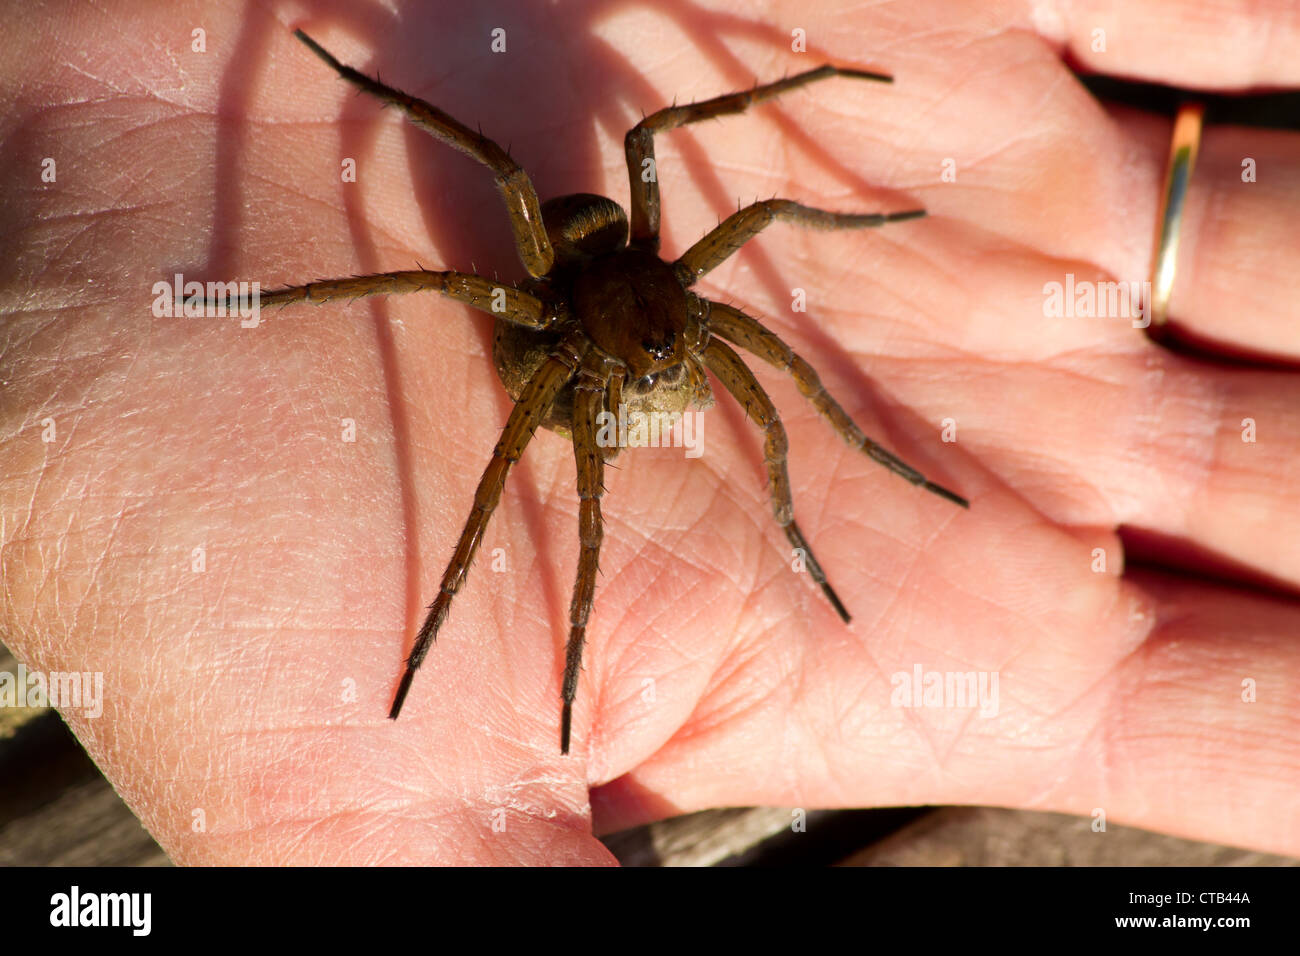 Fen Raft spider - Dolomedes plantarius, in the palm of a hand, carrying an egg sac. Stock Photo